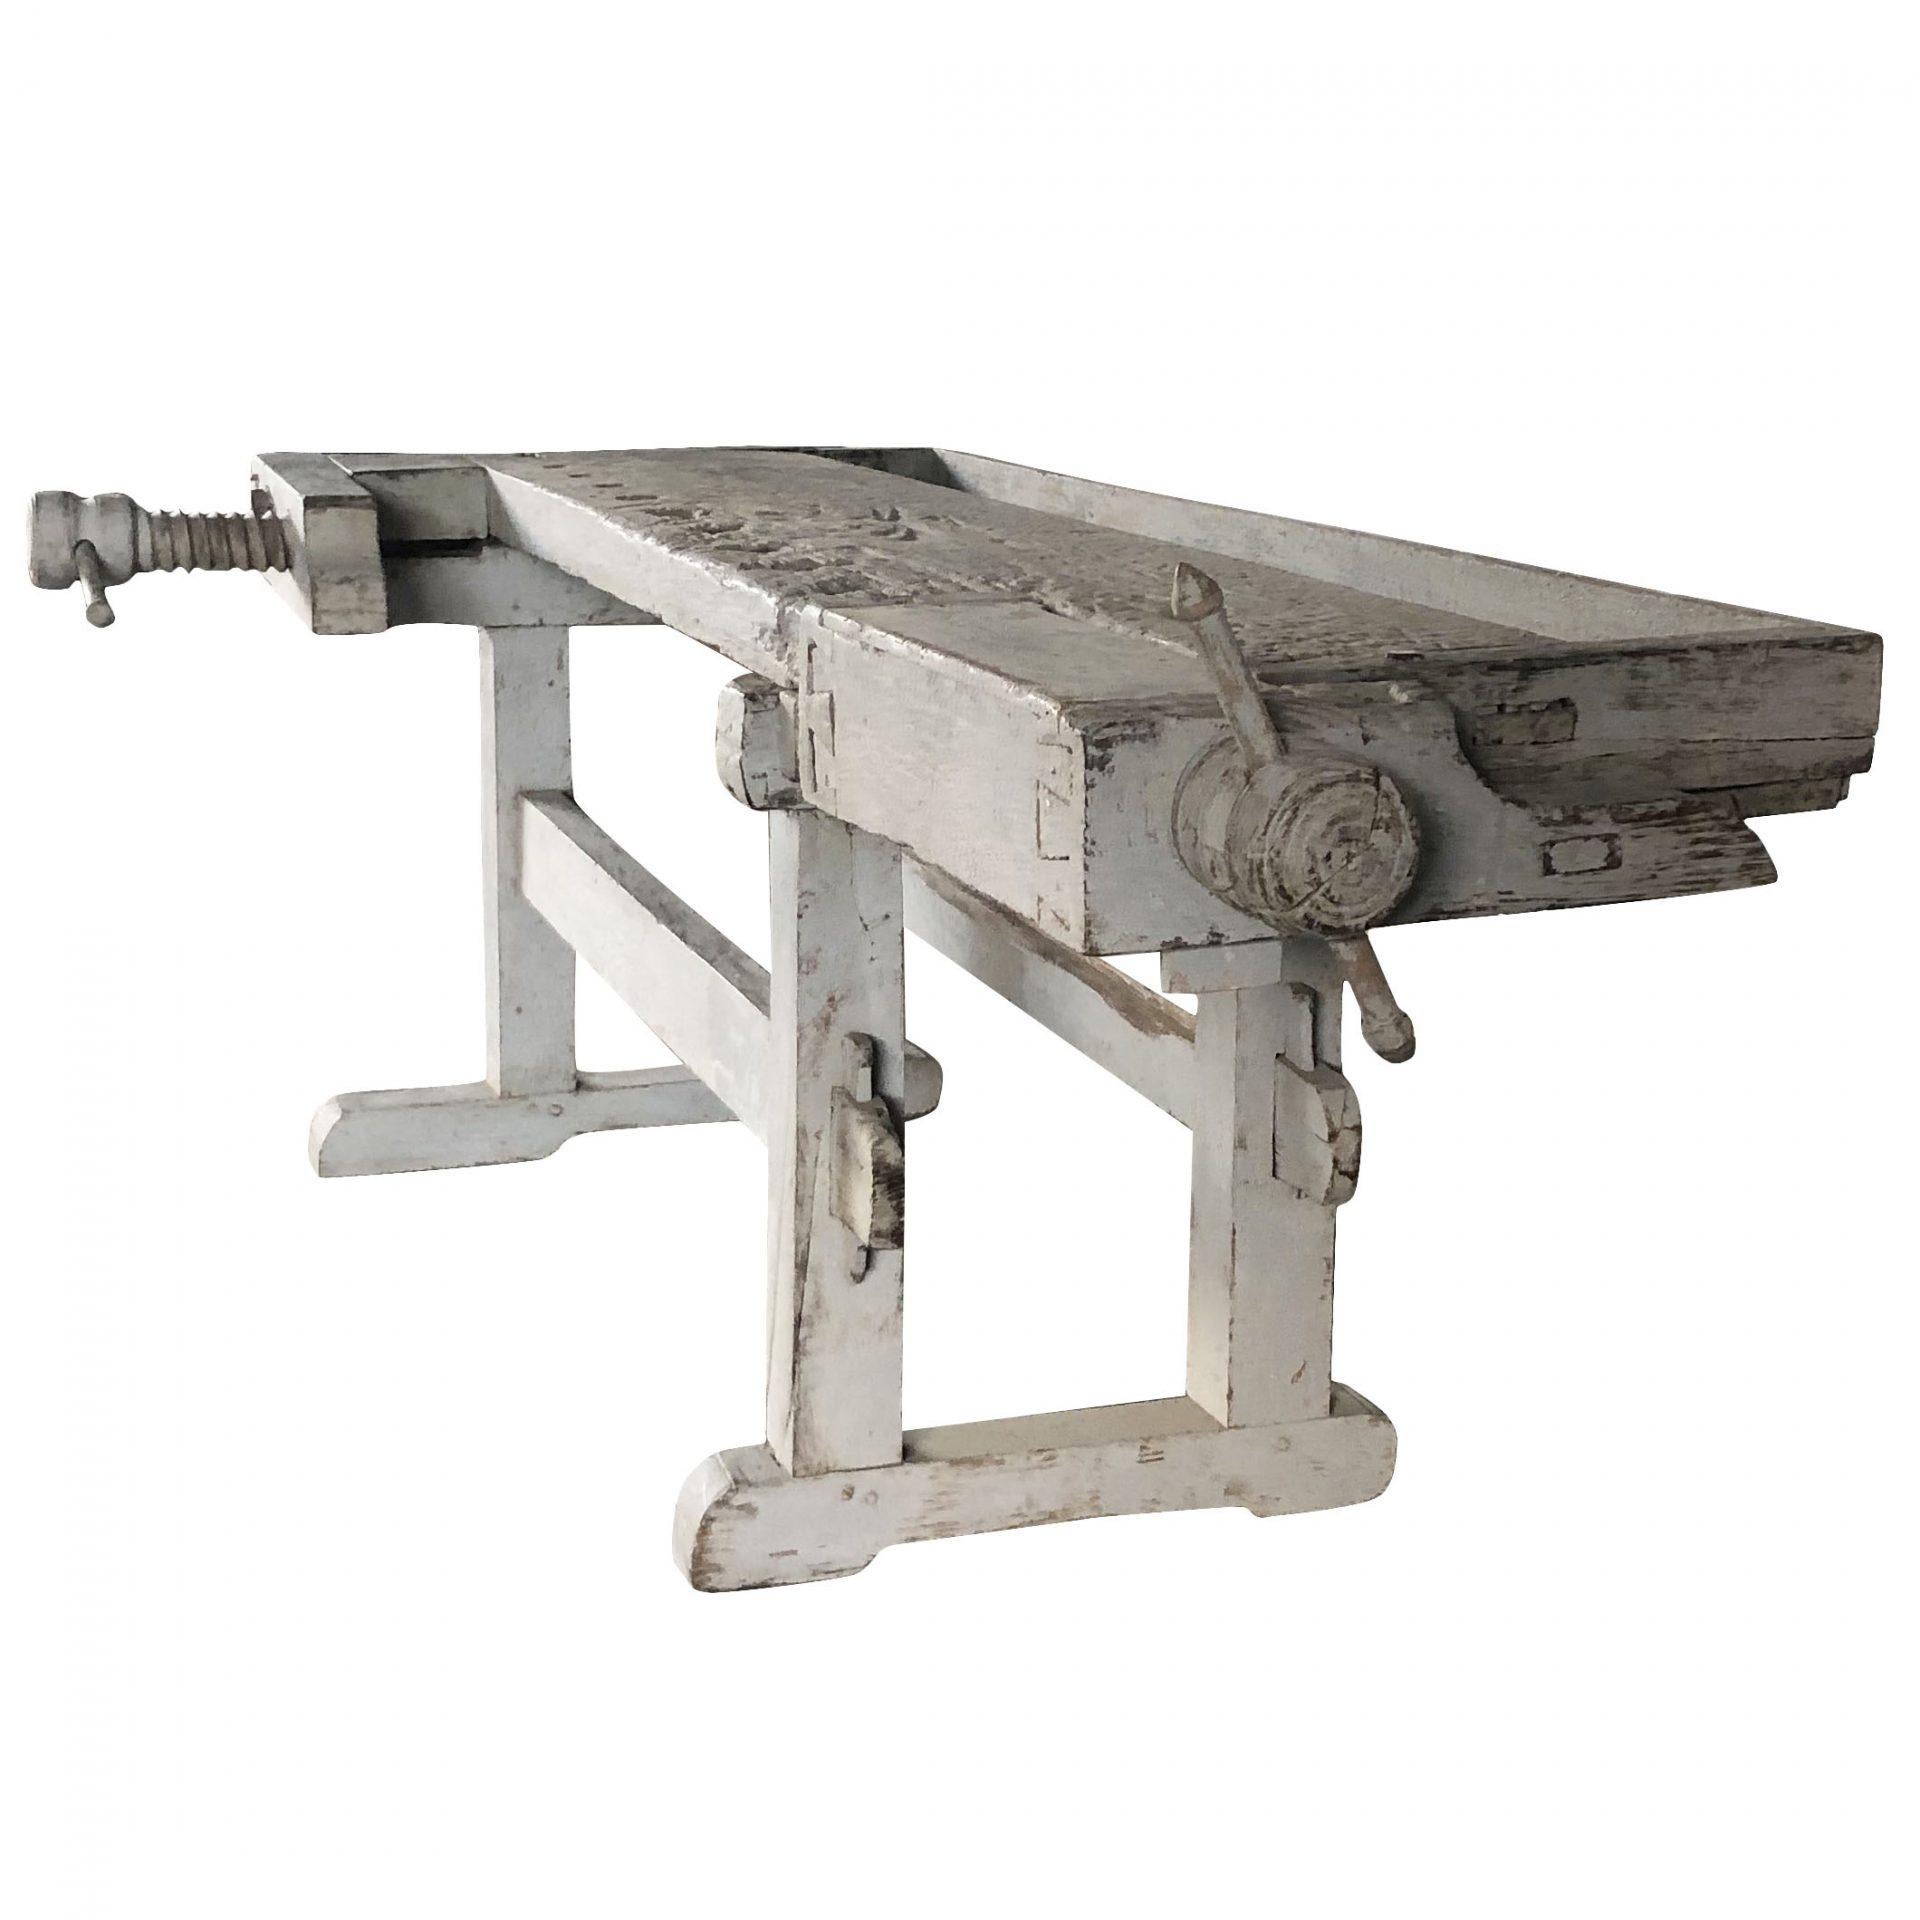 A 19th Century, Swedish Gustavian working bench made of hand crafted painted Pinewood in a pale grey antique finish, in good condition. The detailed Scandinavian carpenter bench is composed with its original wooden screw, standing on four wooden